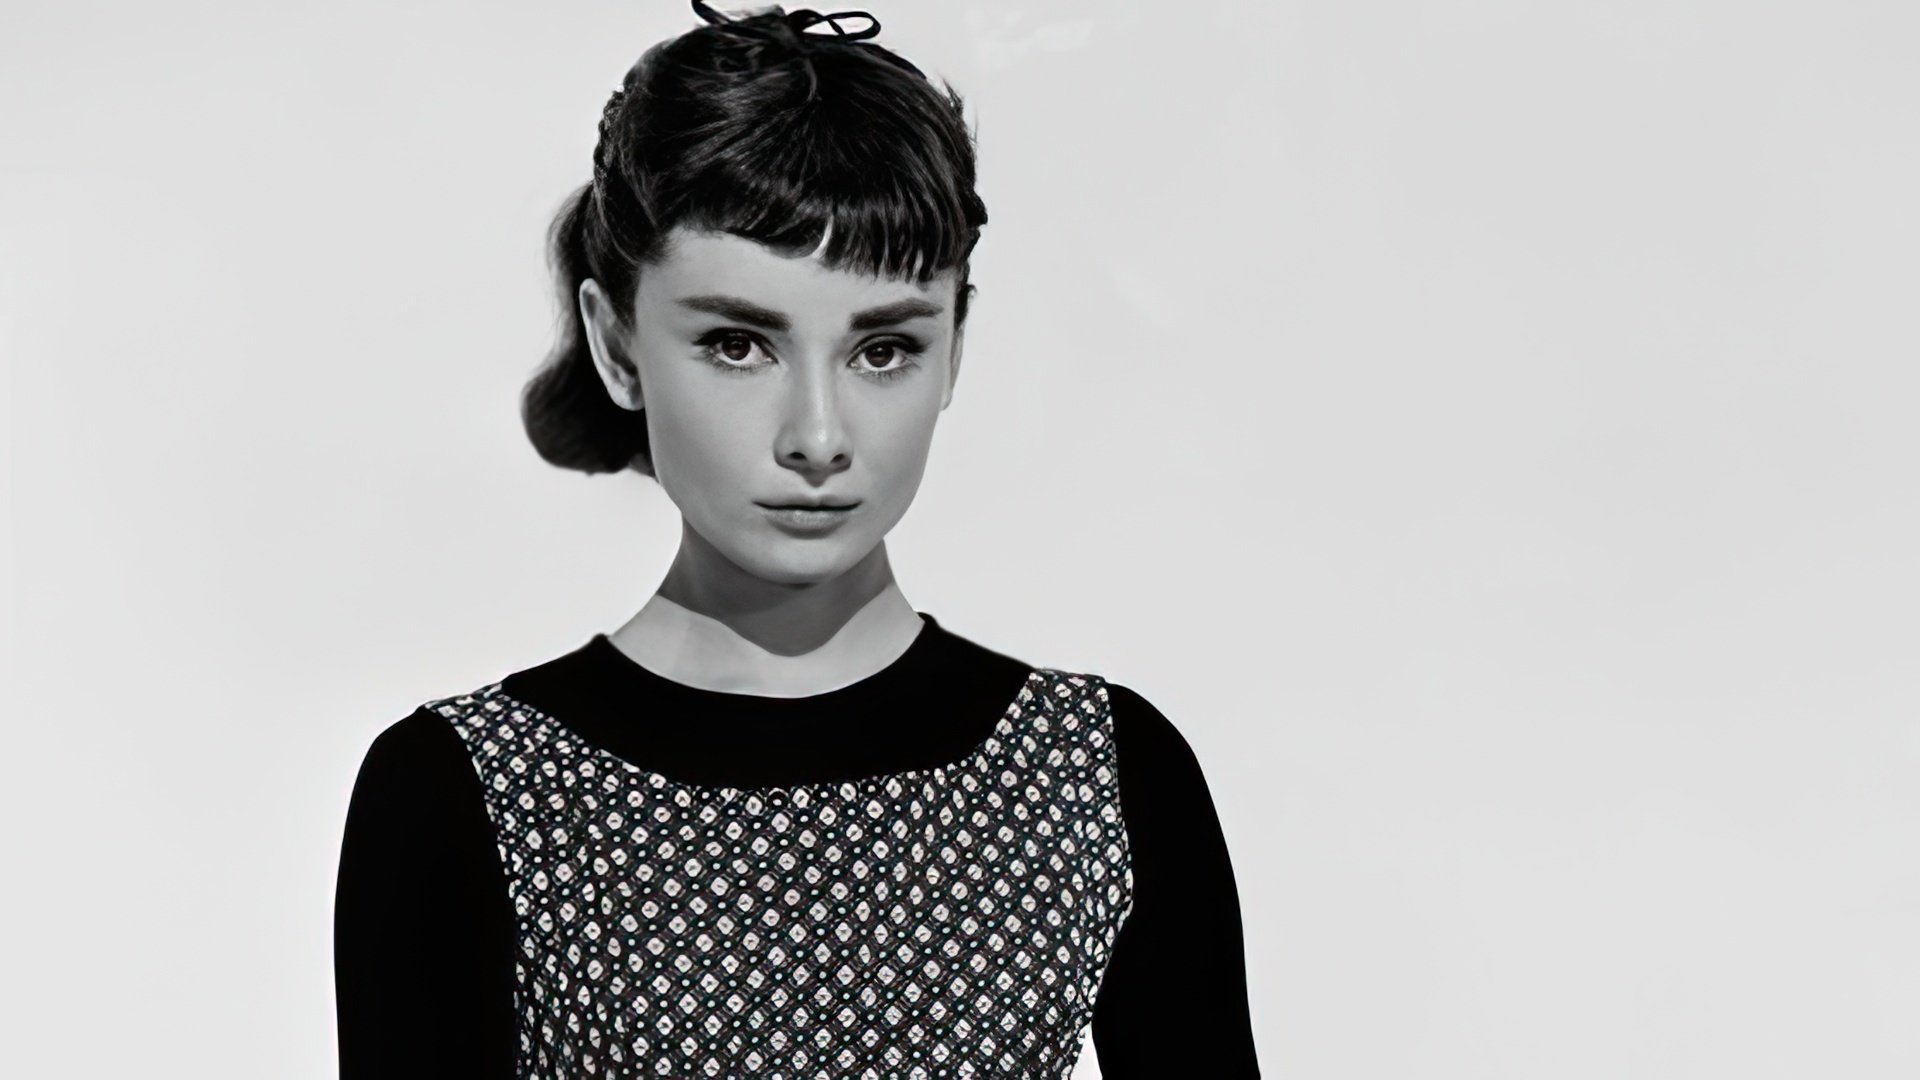 Audrey's acting career started in 1948